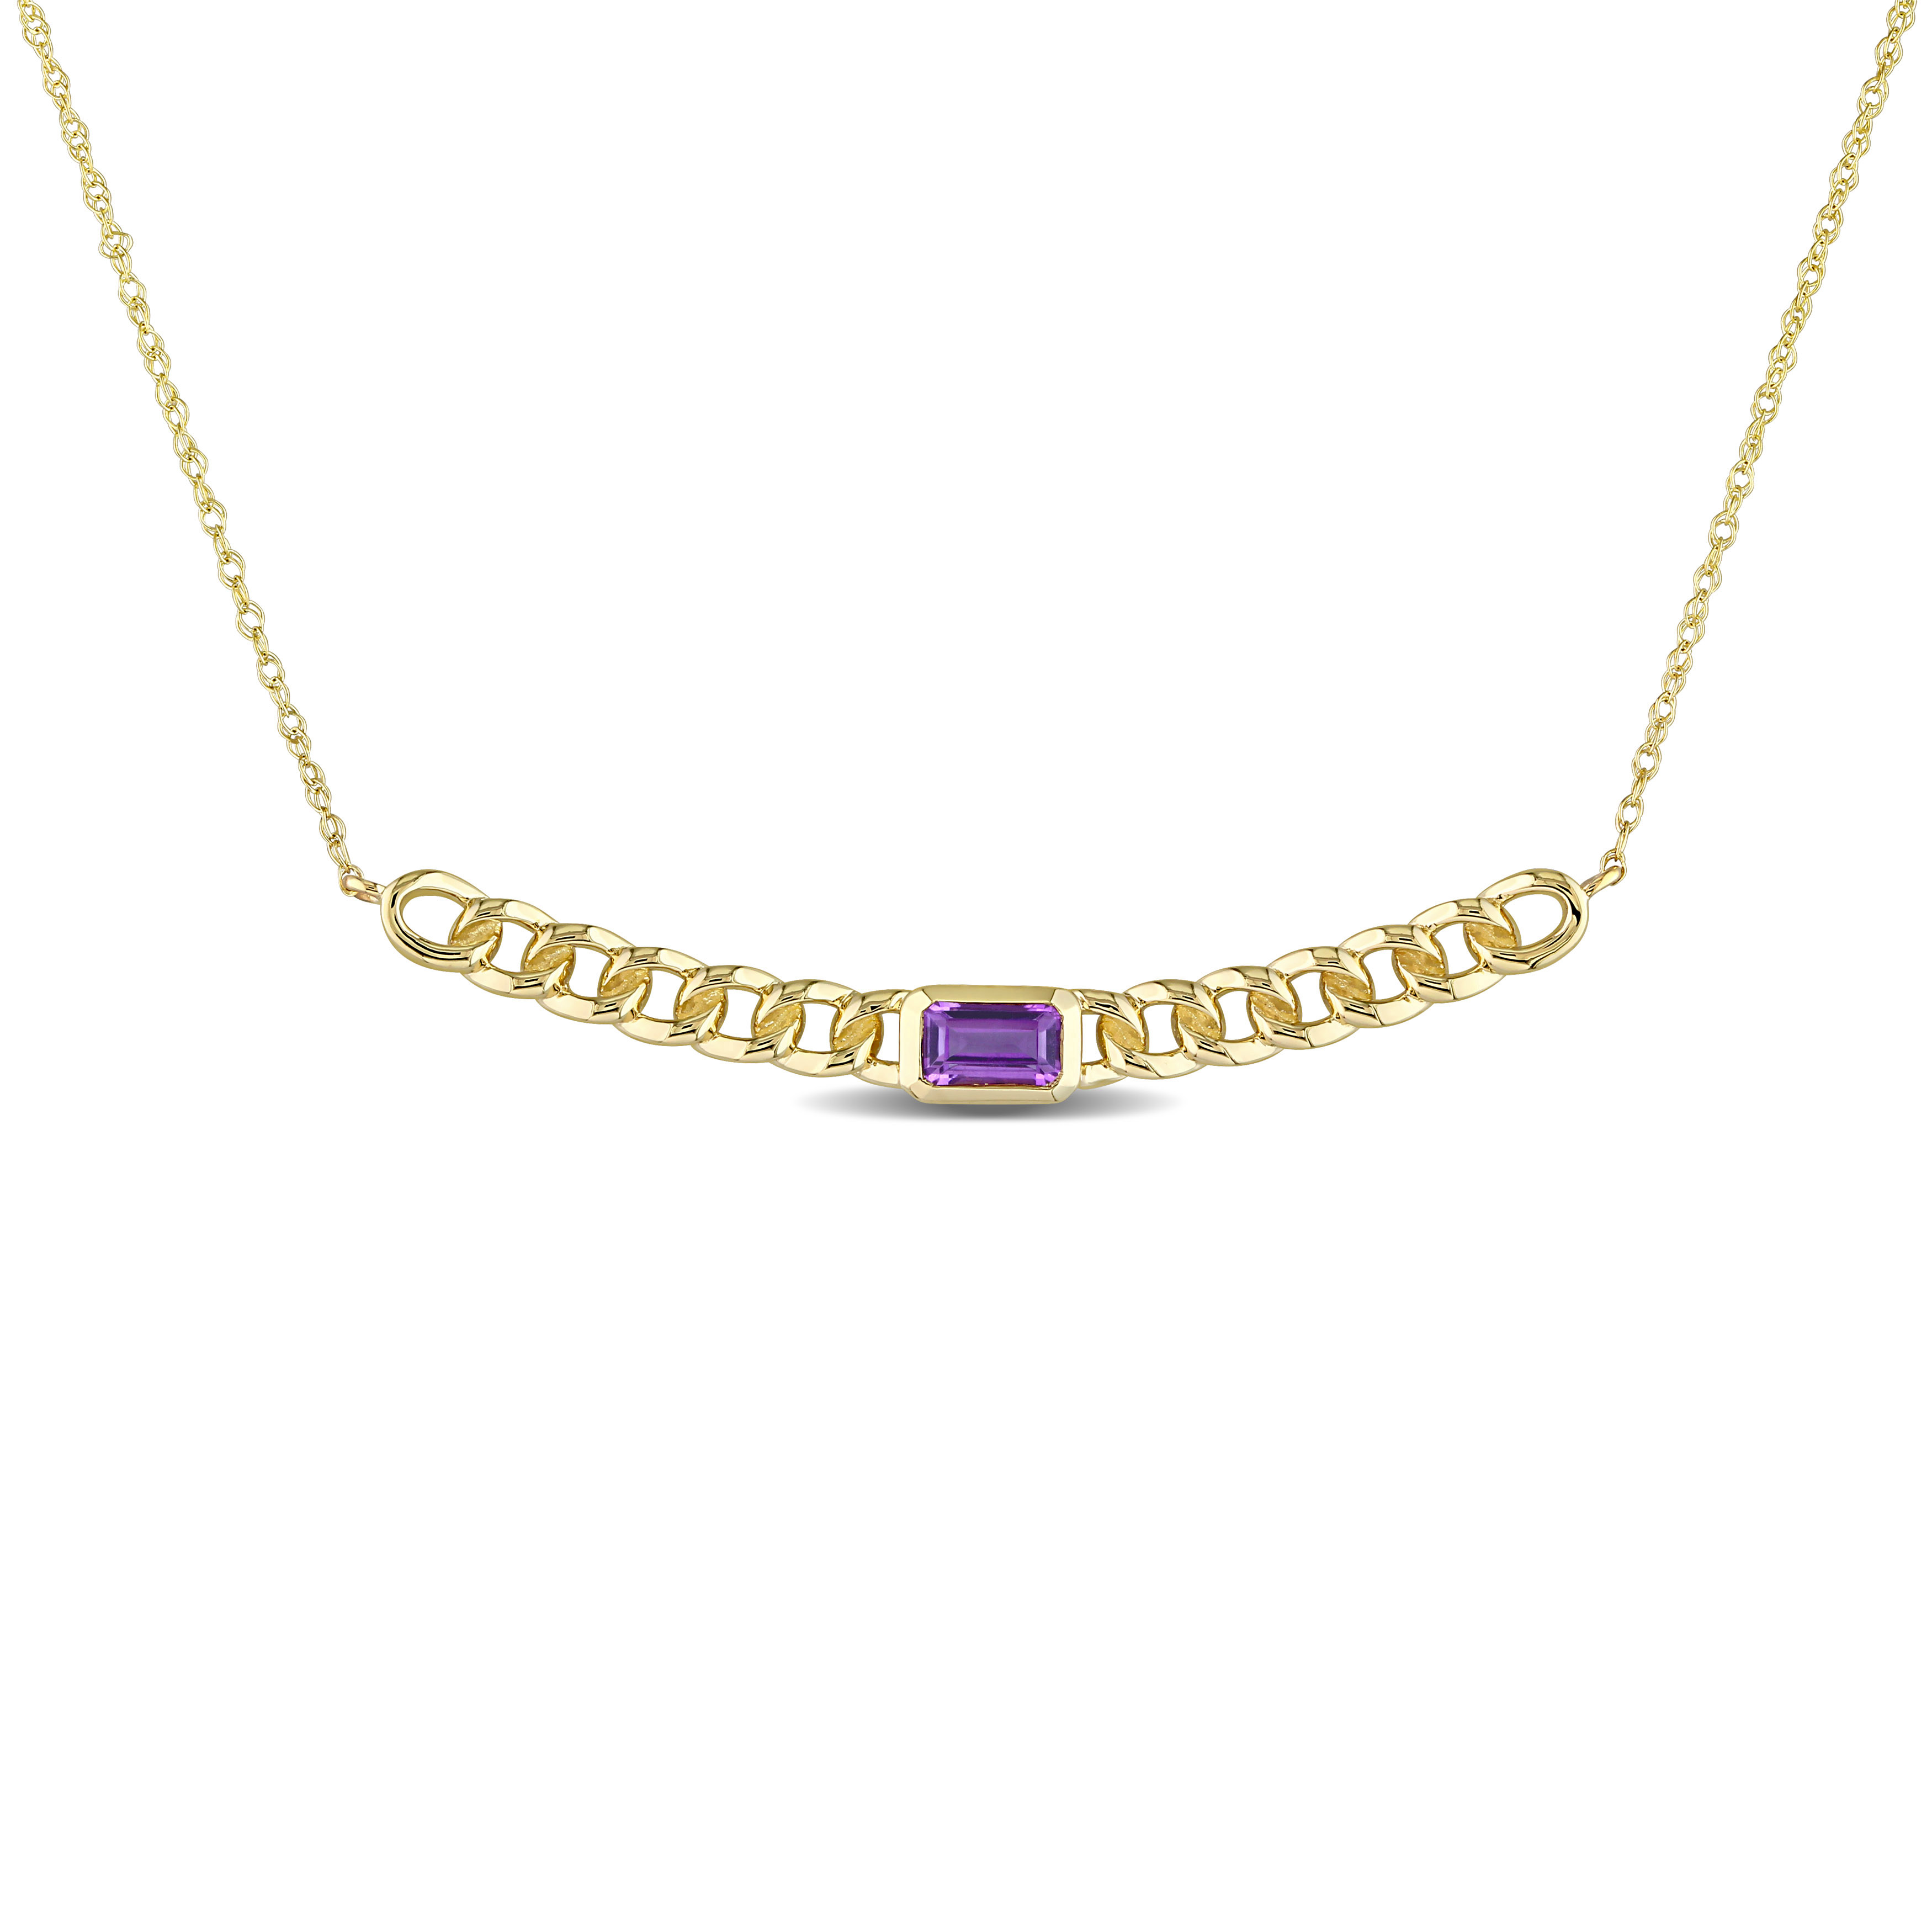 1/5 CT TGW Octagon Amethyst Link Necklace in 10k Yellow Gold - 17 in.